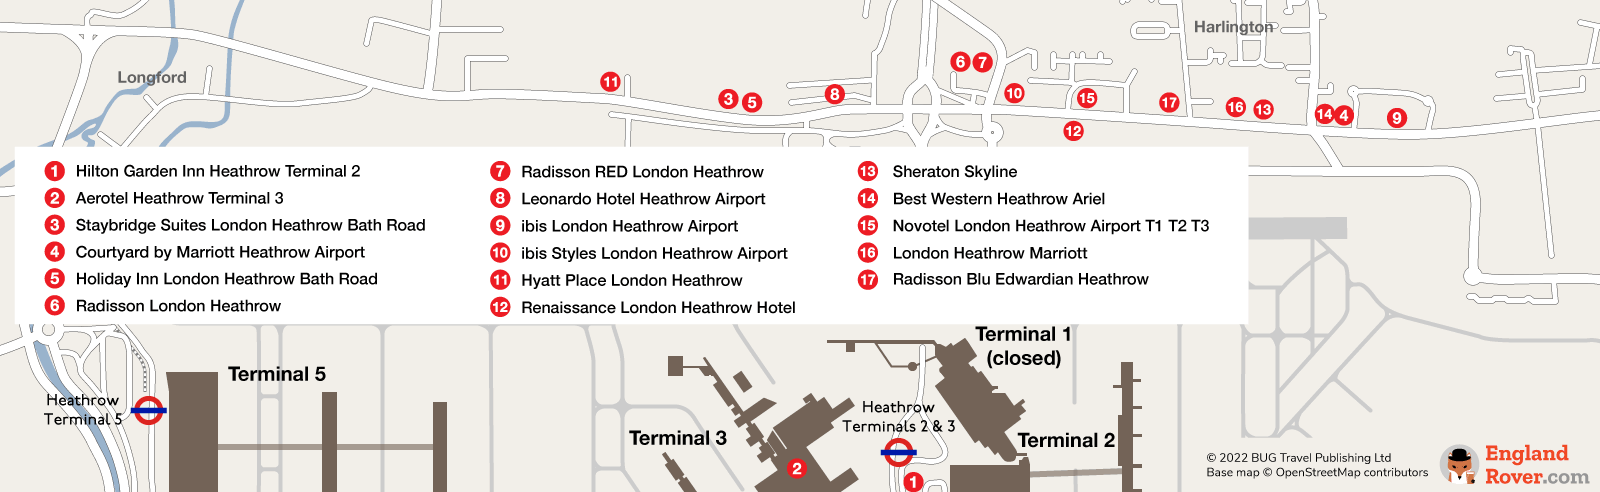 Hotels near London Heathrow Airport terminals 2 and 3